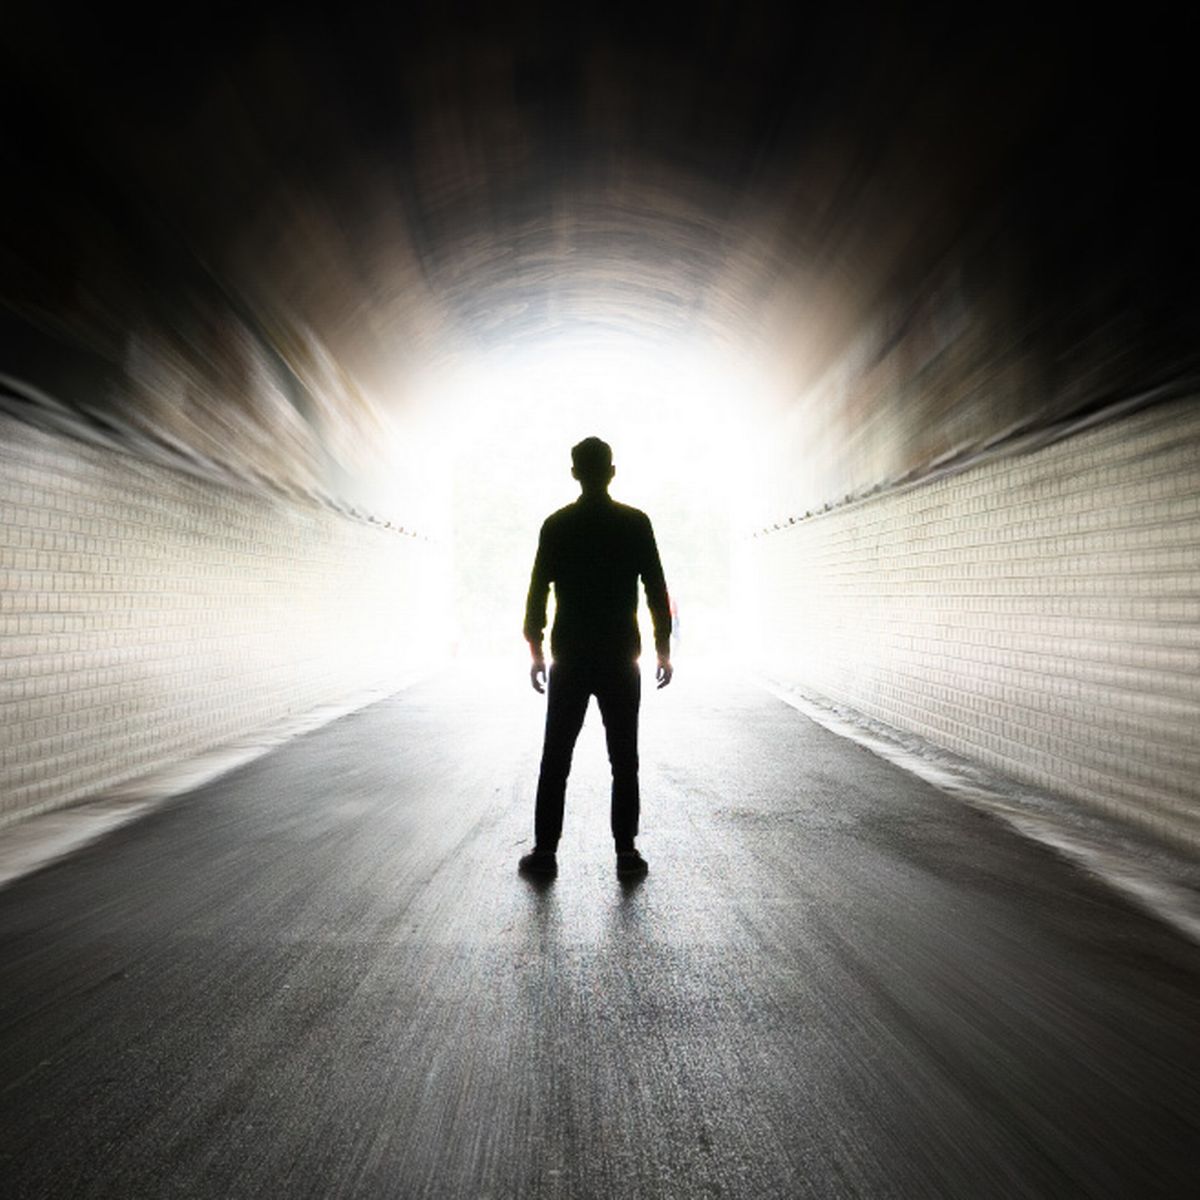 0_Secrets-of-near-death-experiences-from-tunnel-of-light-to-grey-zone-between-living-and-dying.jpg